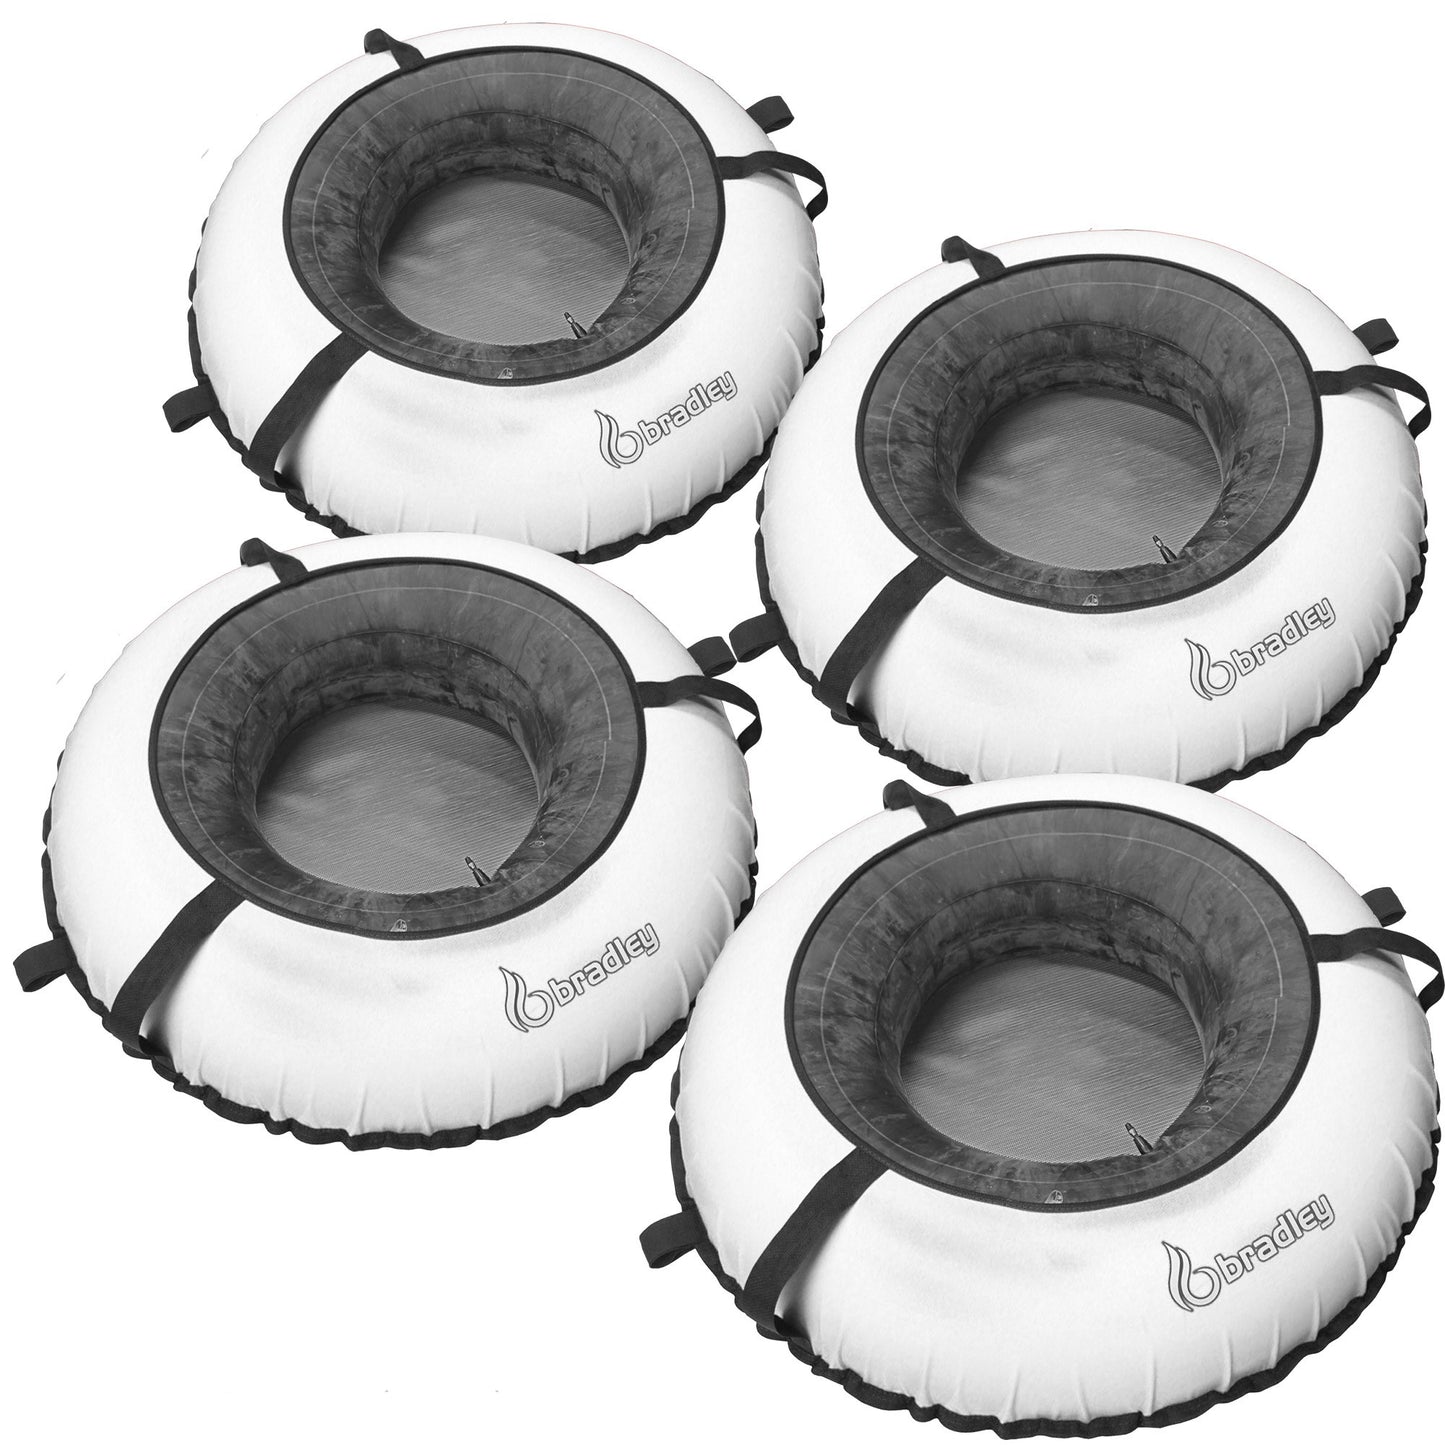 Pack of four Bradley heavy duty tubes for floating the river; Whitewater water tube; Rubber inner tube with cover for river floating; Linking river tubes for floating the river; river raft tubes